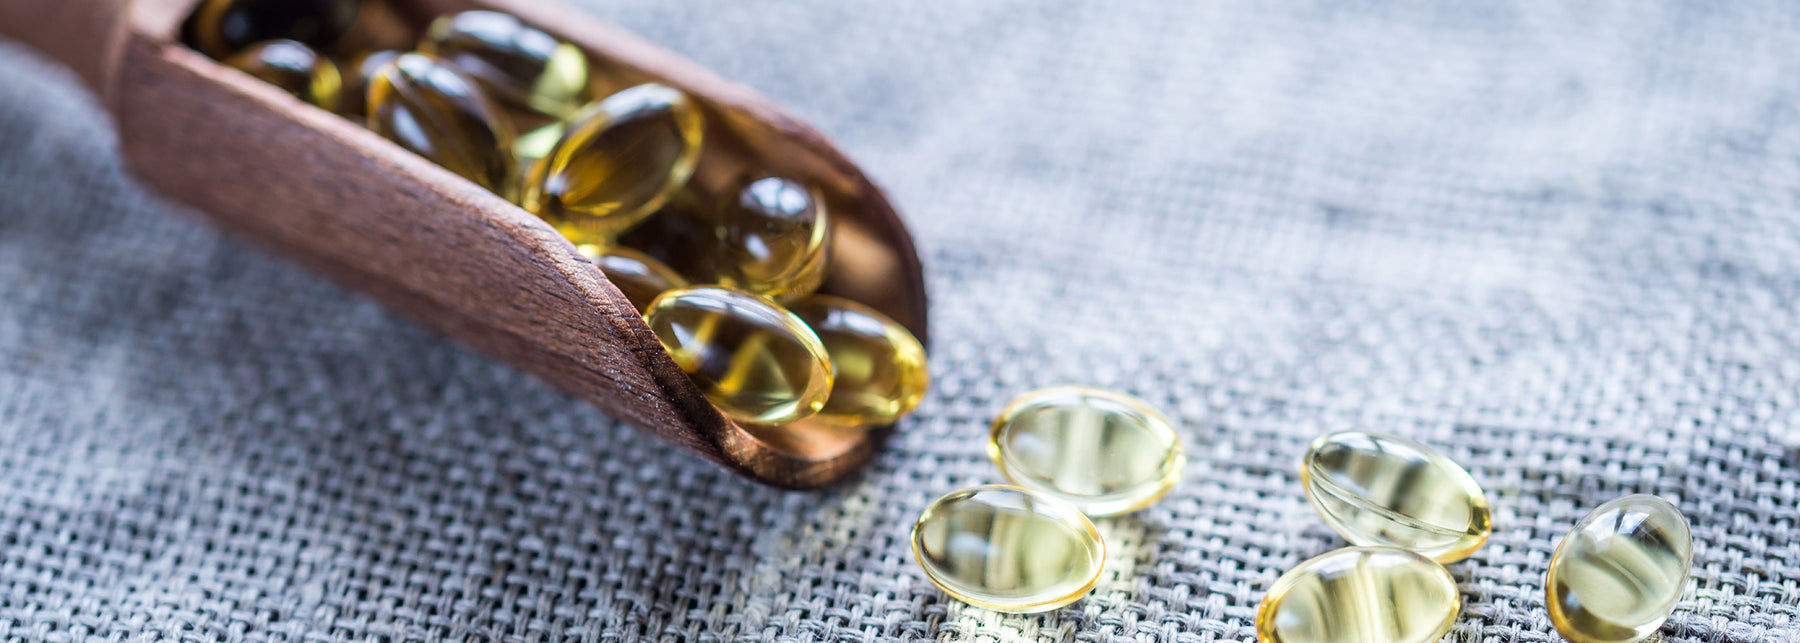 Why is cod liver oil important for your body?